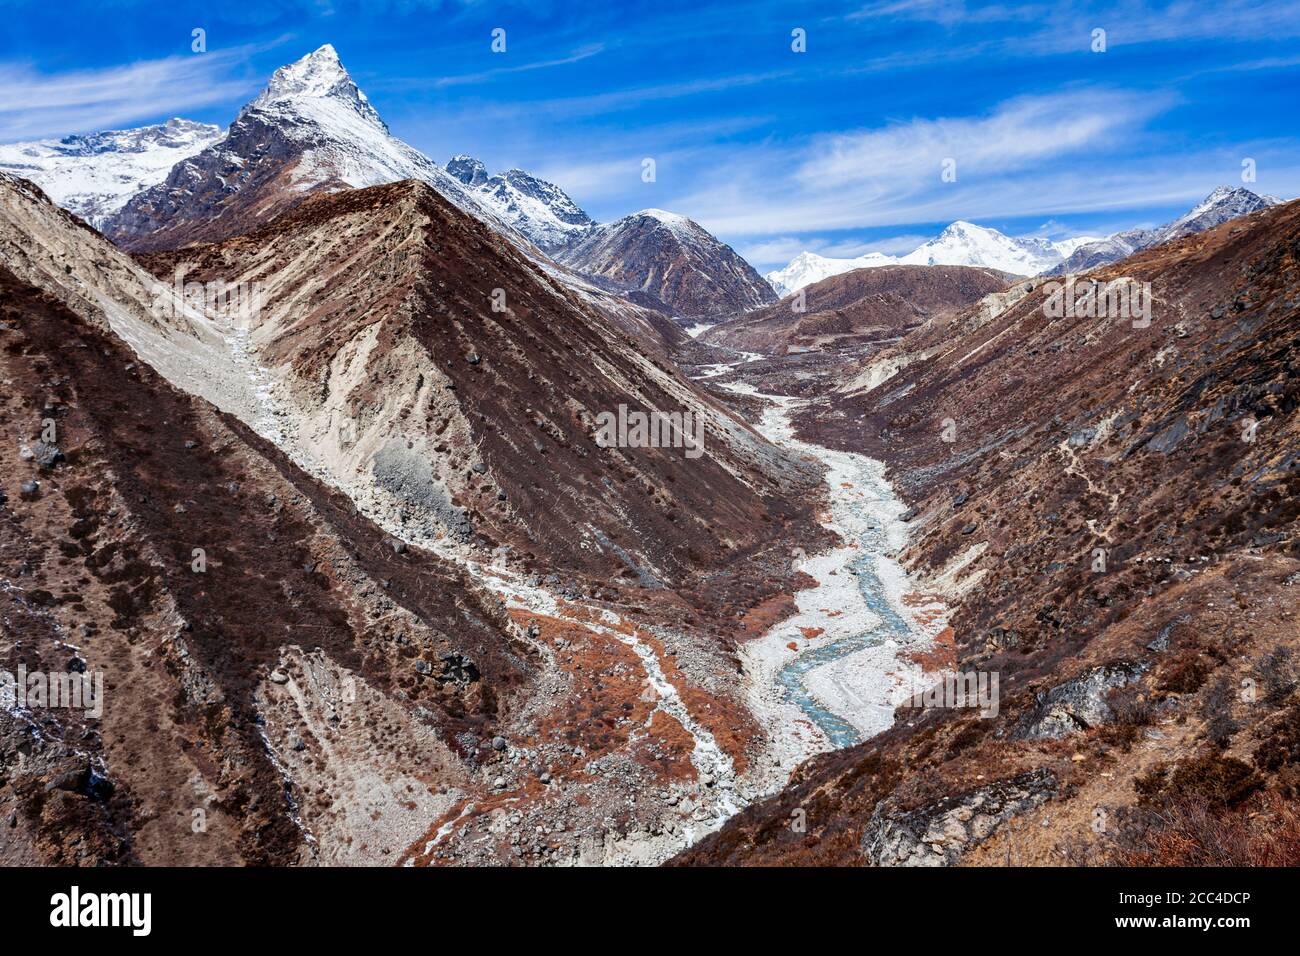 Dudh Koshi river valley scenic mountain landscape in Everest or Khumbu region in Himalaya in Nepal Stock Photo